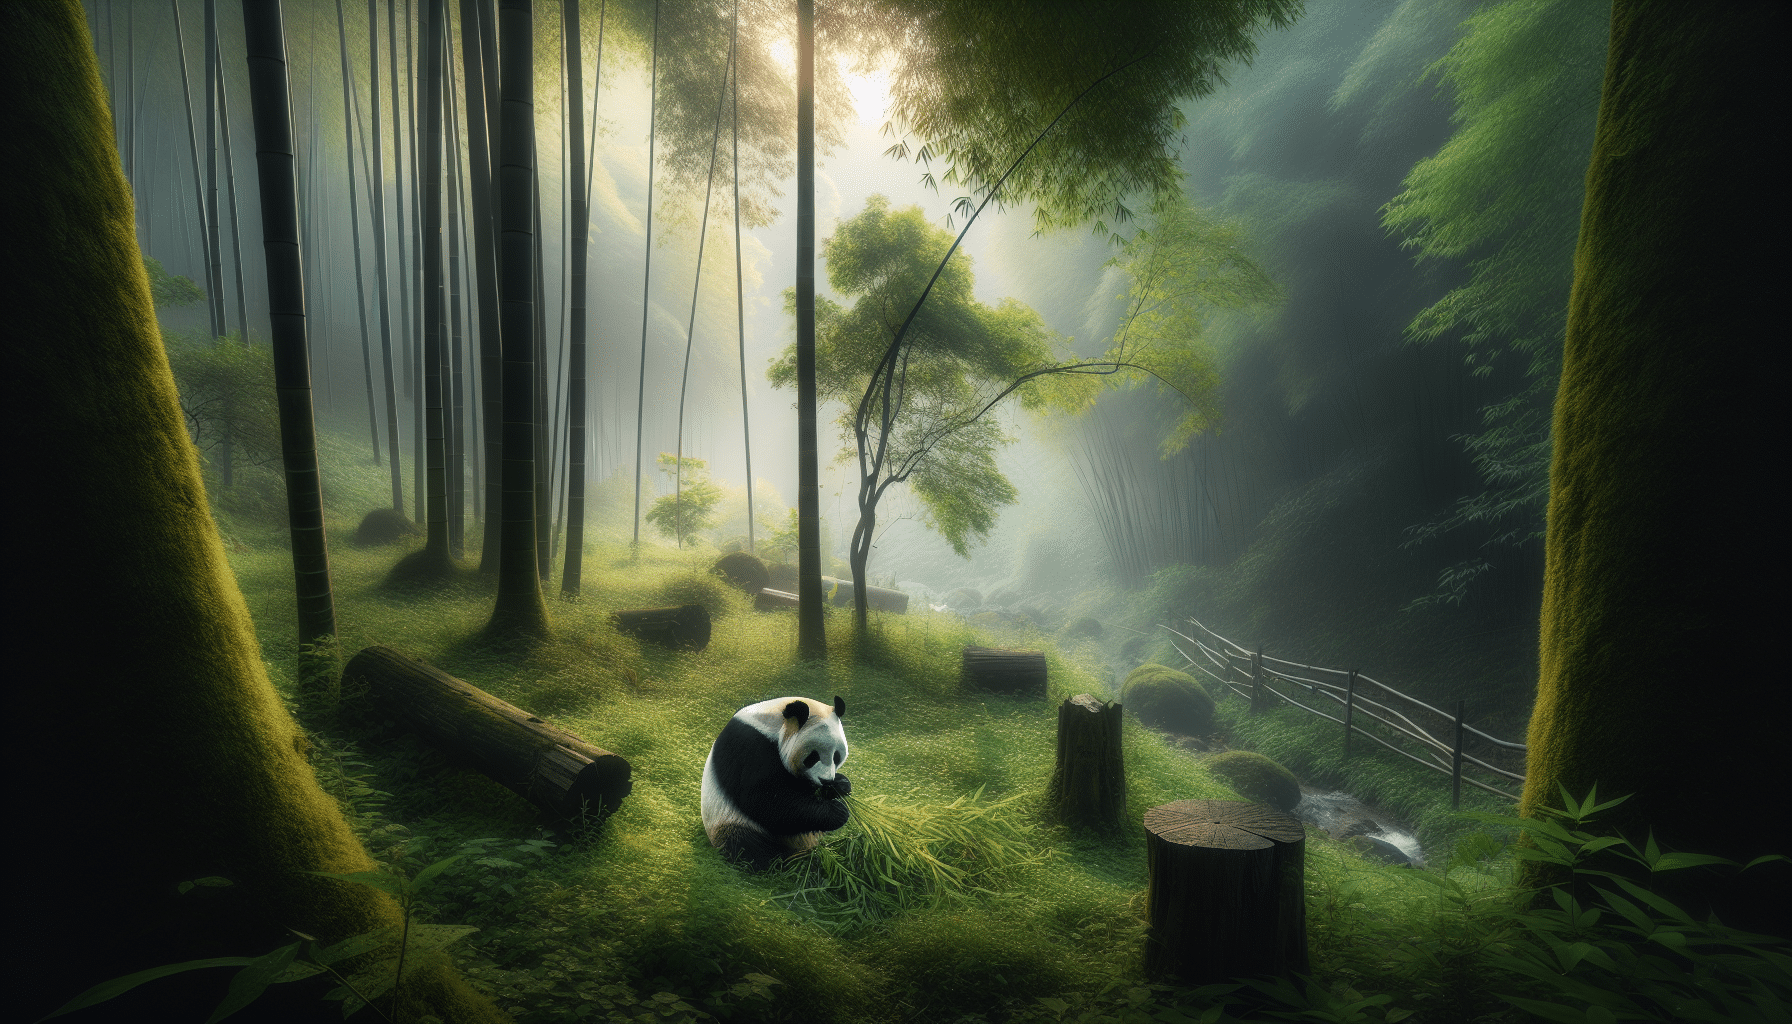 A serene wilderness landscape, with the main focus being the rarest bear specie in the wild, which is the Giant Panda. It can be spotted amidst the lush green bamboo forest. The panda is gladly munching away at its favourite food, bamboo. There are no people or man-made structures to disturb the tranquil scene. The focus is entirely on the solitude and beauty of the panda in its natural habitat. Everything is infused with the soft light of dawn, reflecting off the dewy leaves, adding a serene glow to the scene.